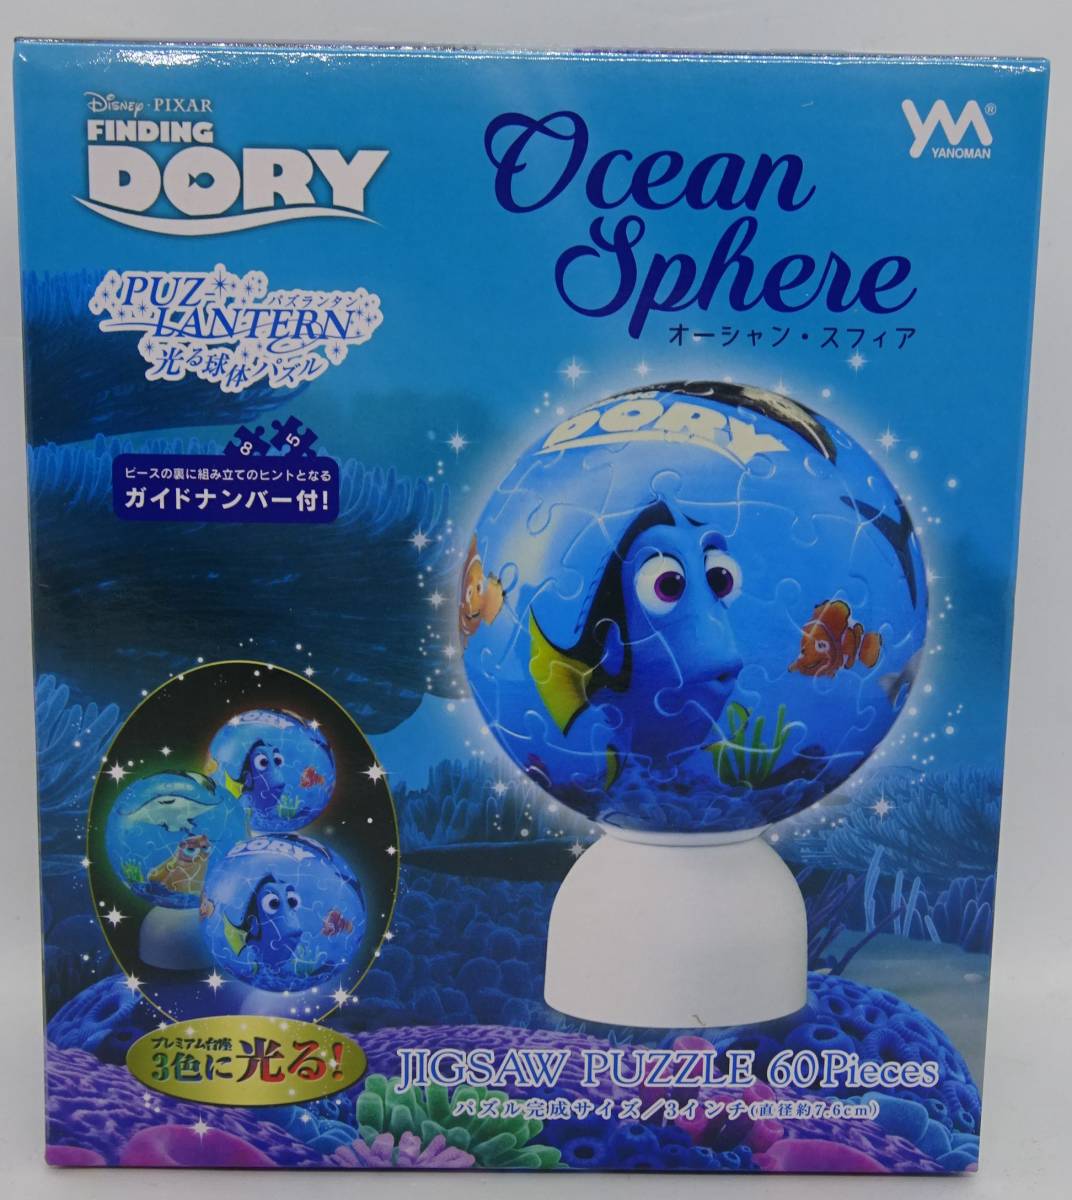 ya. ..3 color . shines lamp body puzzle paz lantern fa Indy ng*do Lee Ocean * sphere 60pcs 2003-483